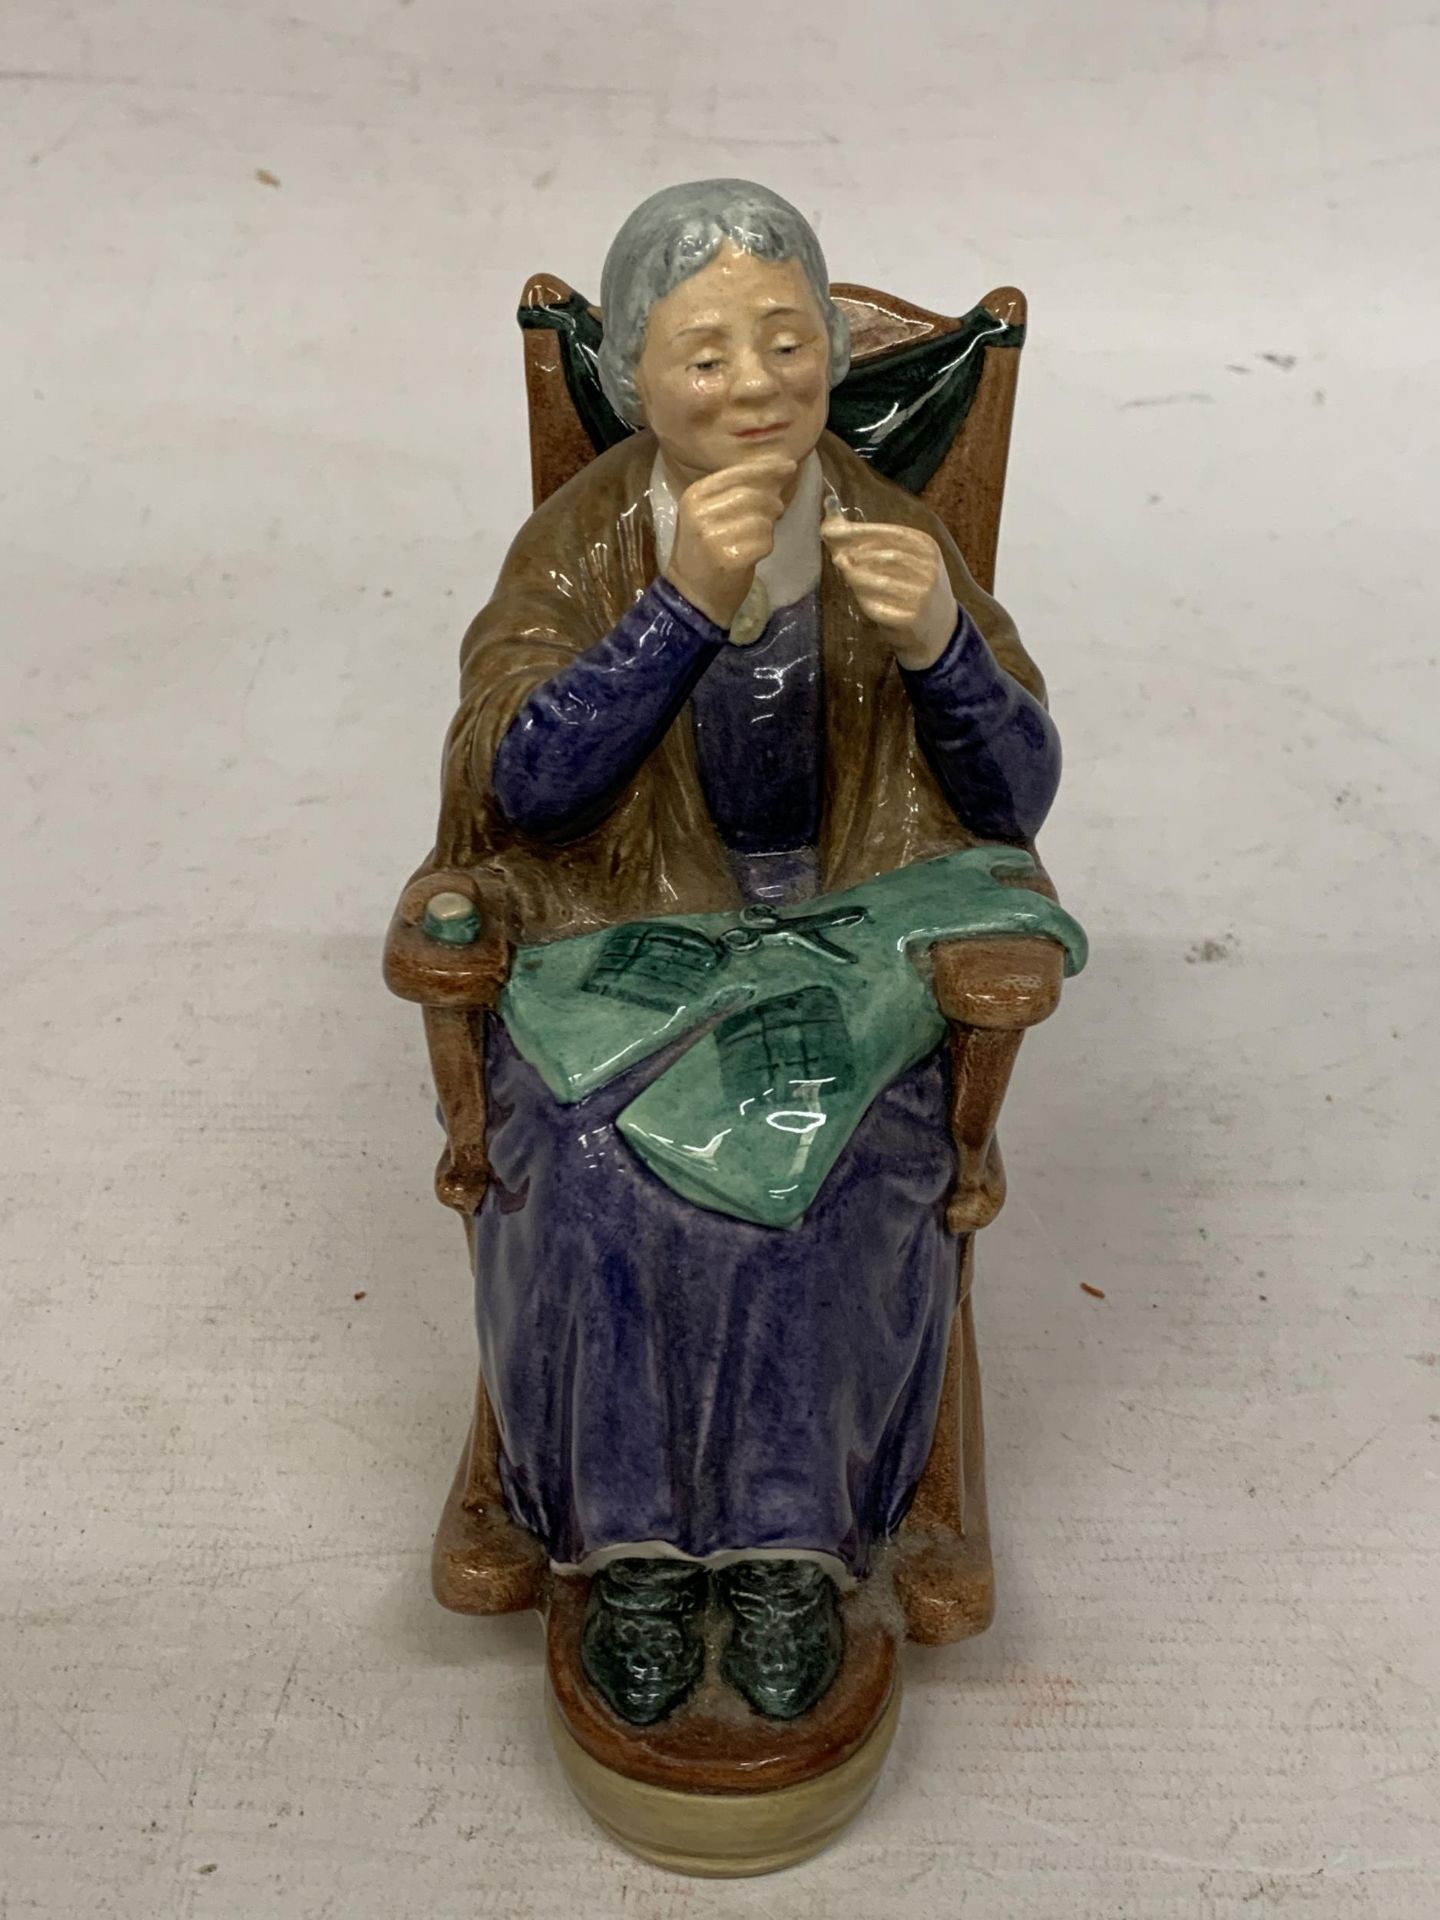 A ROYAL DOULTON FIGURINE "A STITCH IN TIME" HN 2352 - Image 2 of 5